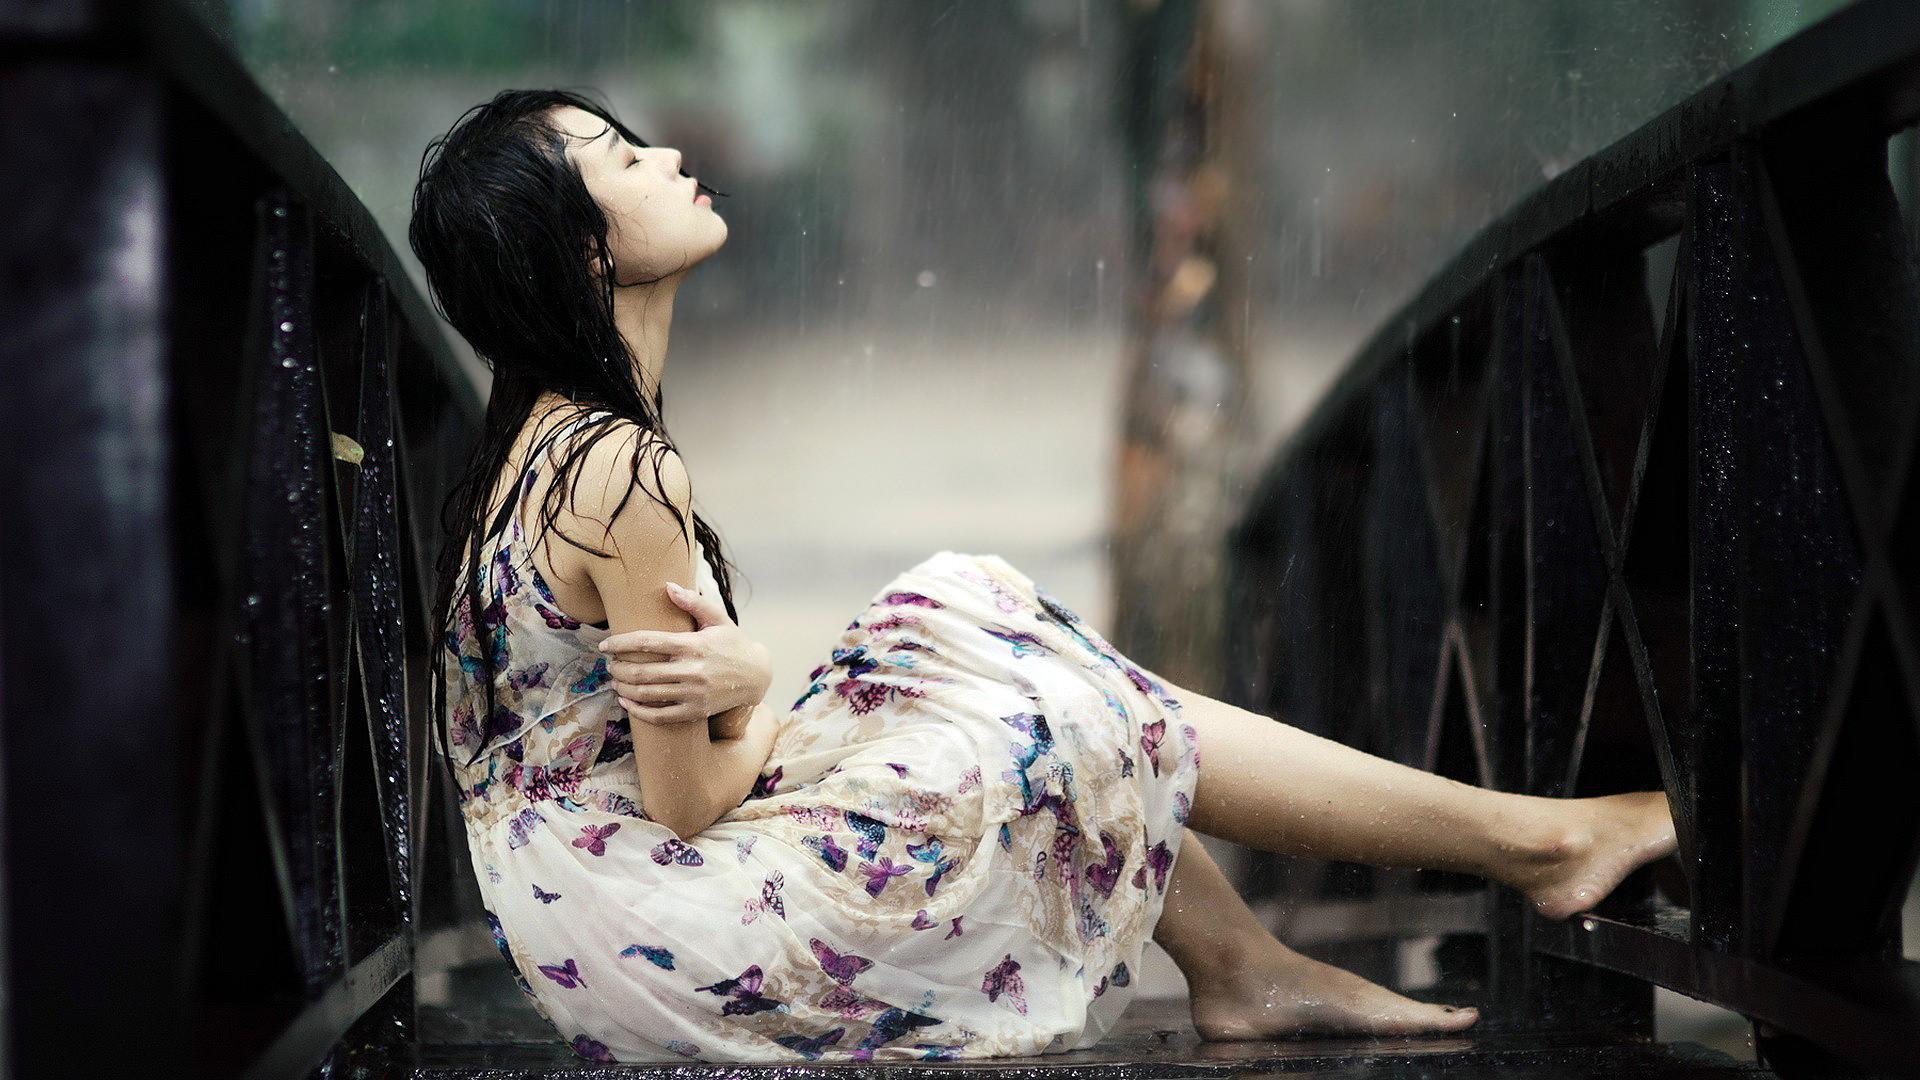 Girl In Rain Wallpapers Pictures Photos Image.